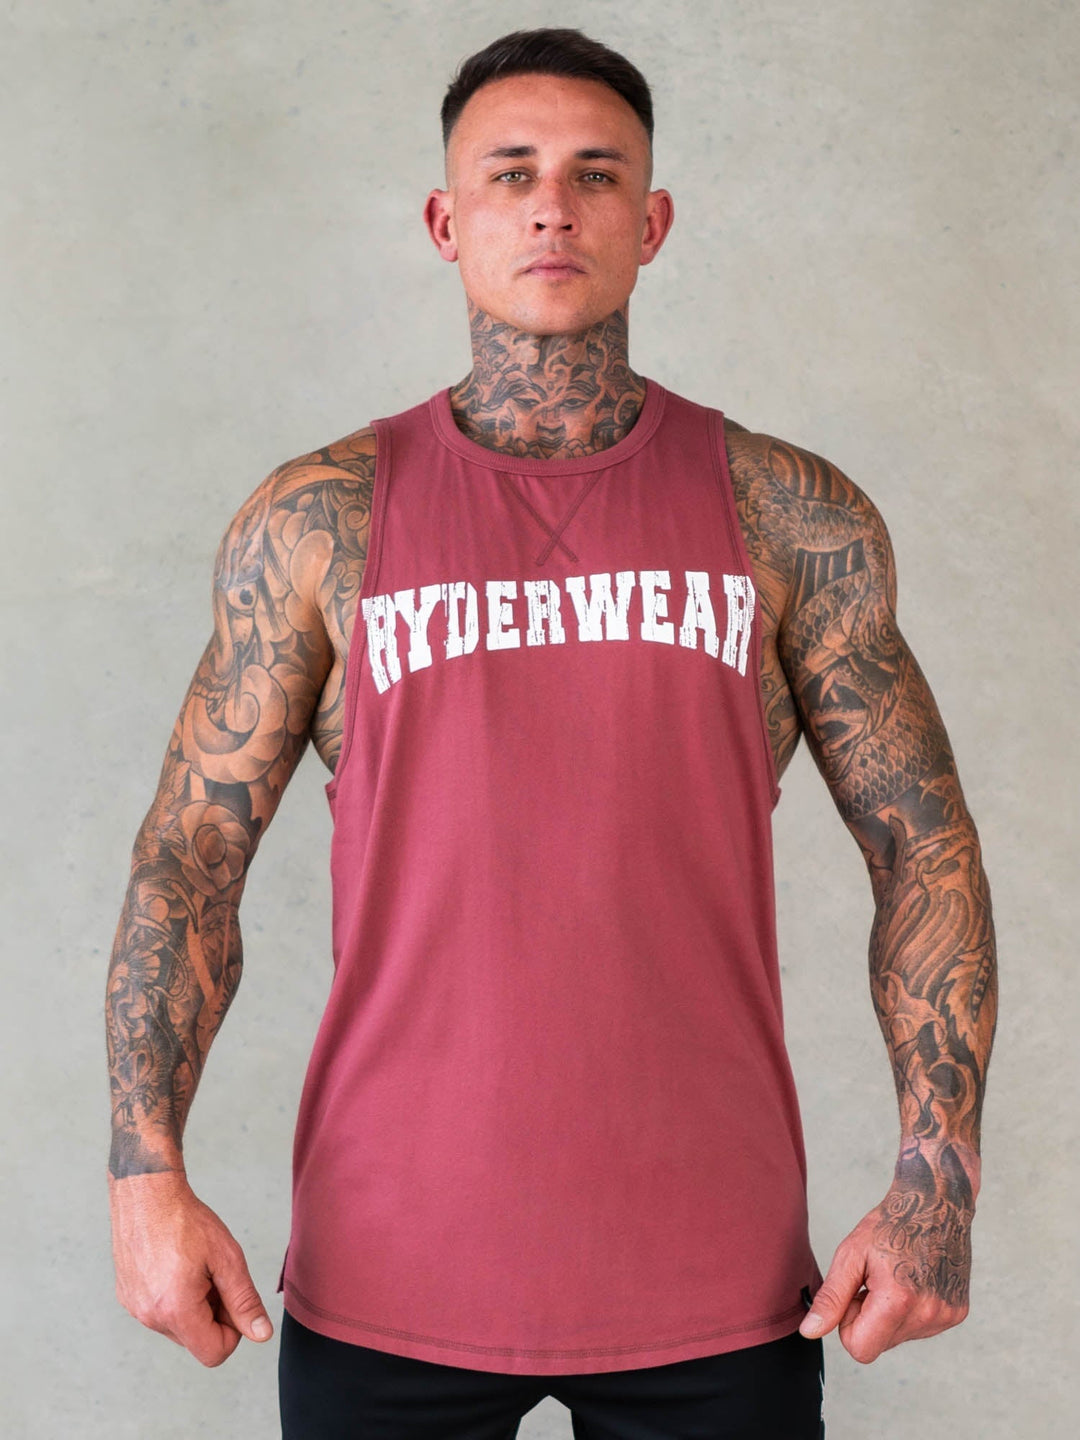 Octane Tank - Red Oxide Clothing Ryderwear 